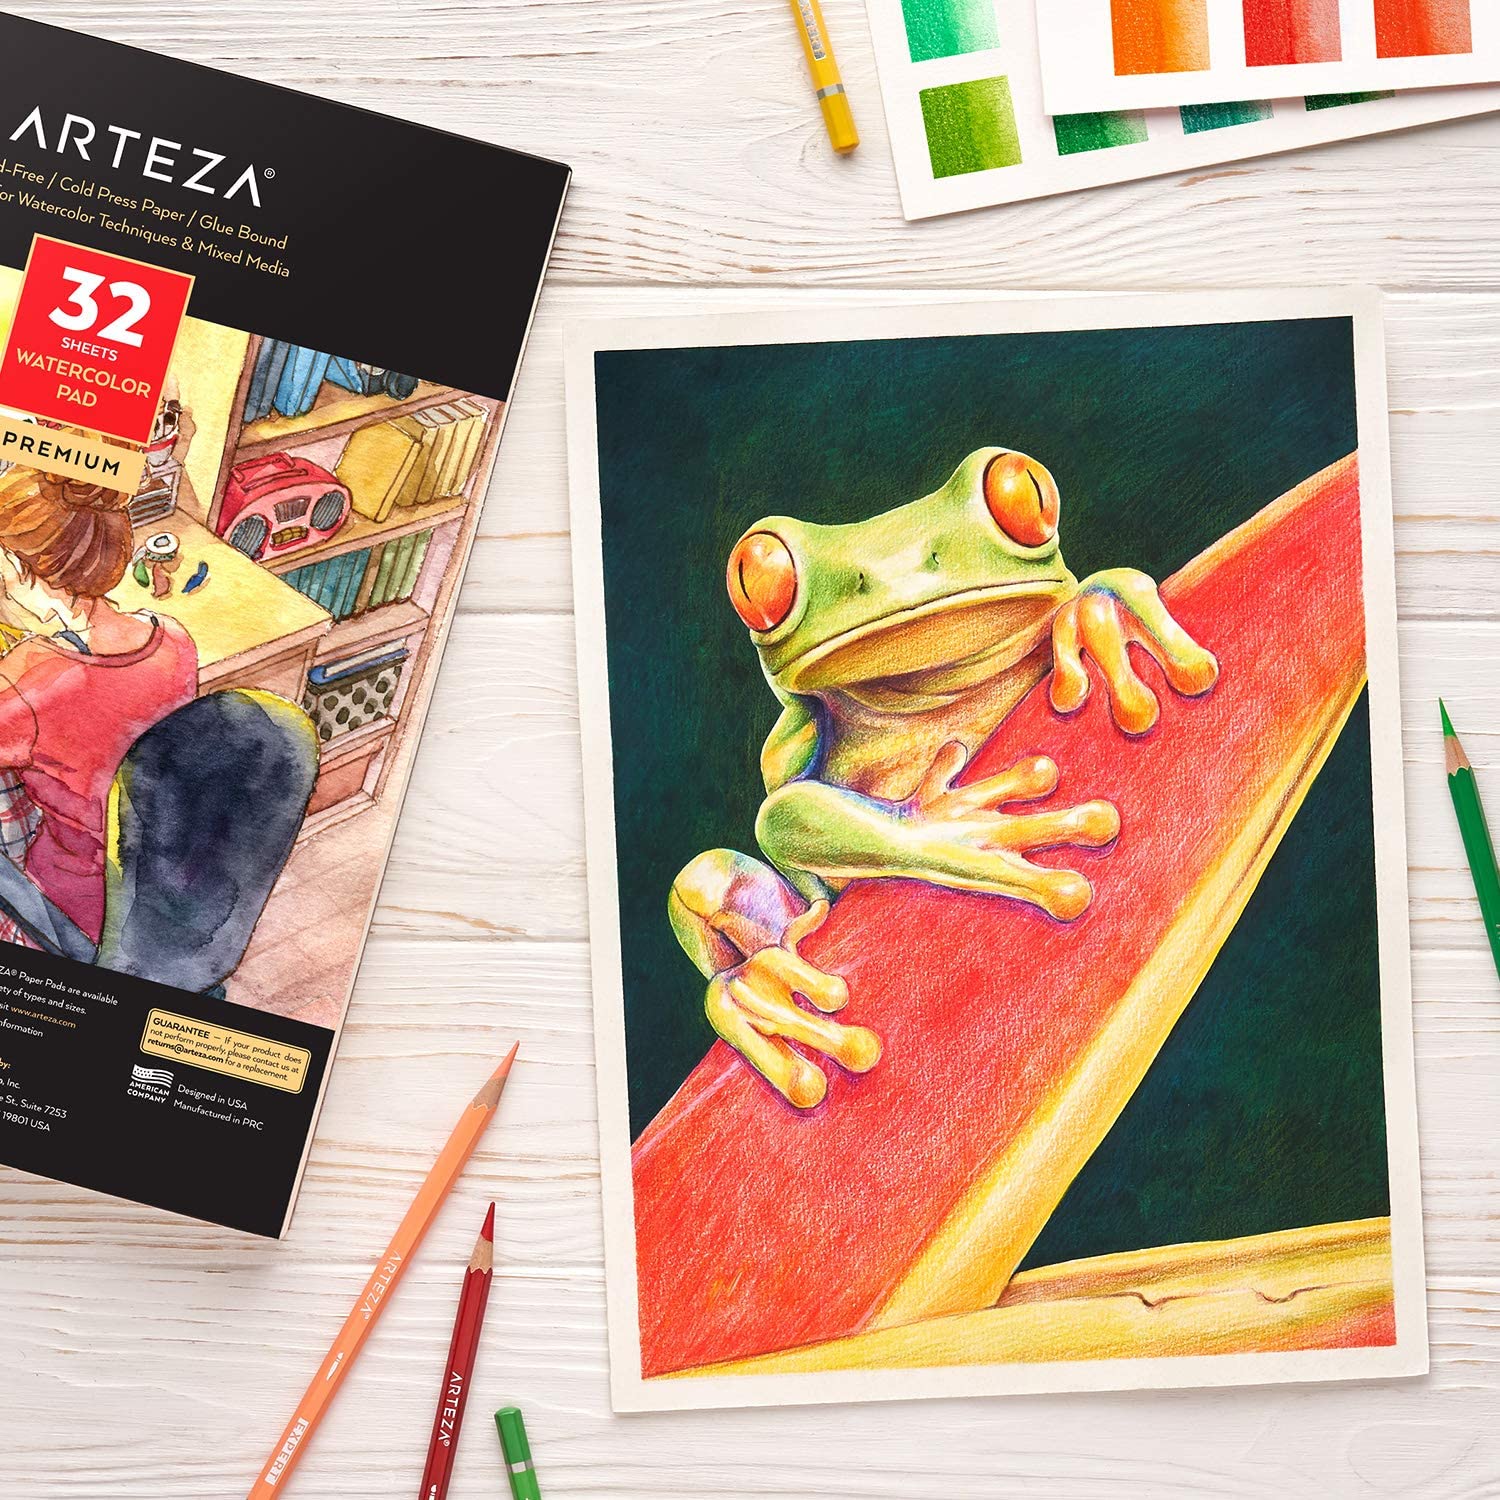 Arteza 5.5x8.5 inch Watercolor Pad, Pack of 3, 90 Sheets 140lb/300gsm, 30 Sheets Each, Spiral Bound Acid Free Cold Pressed Paper